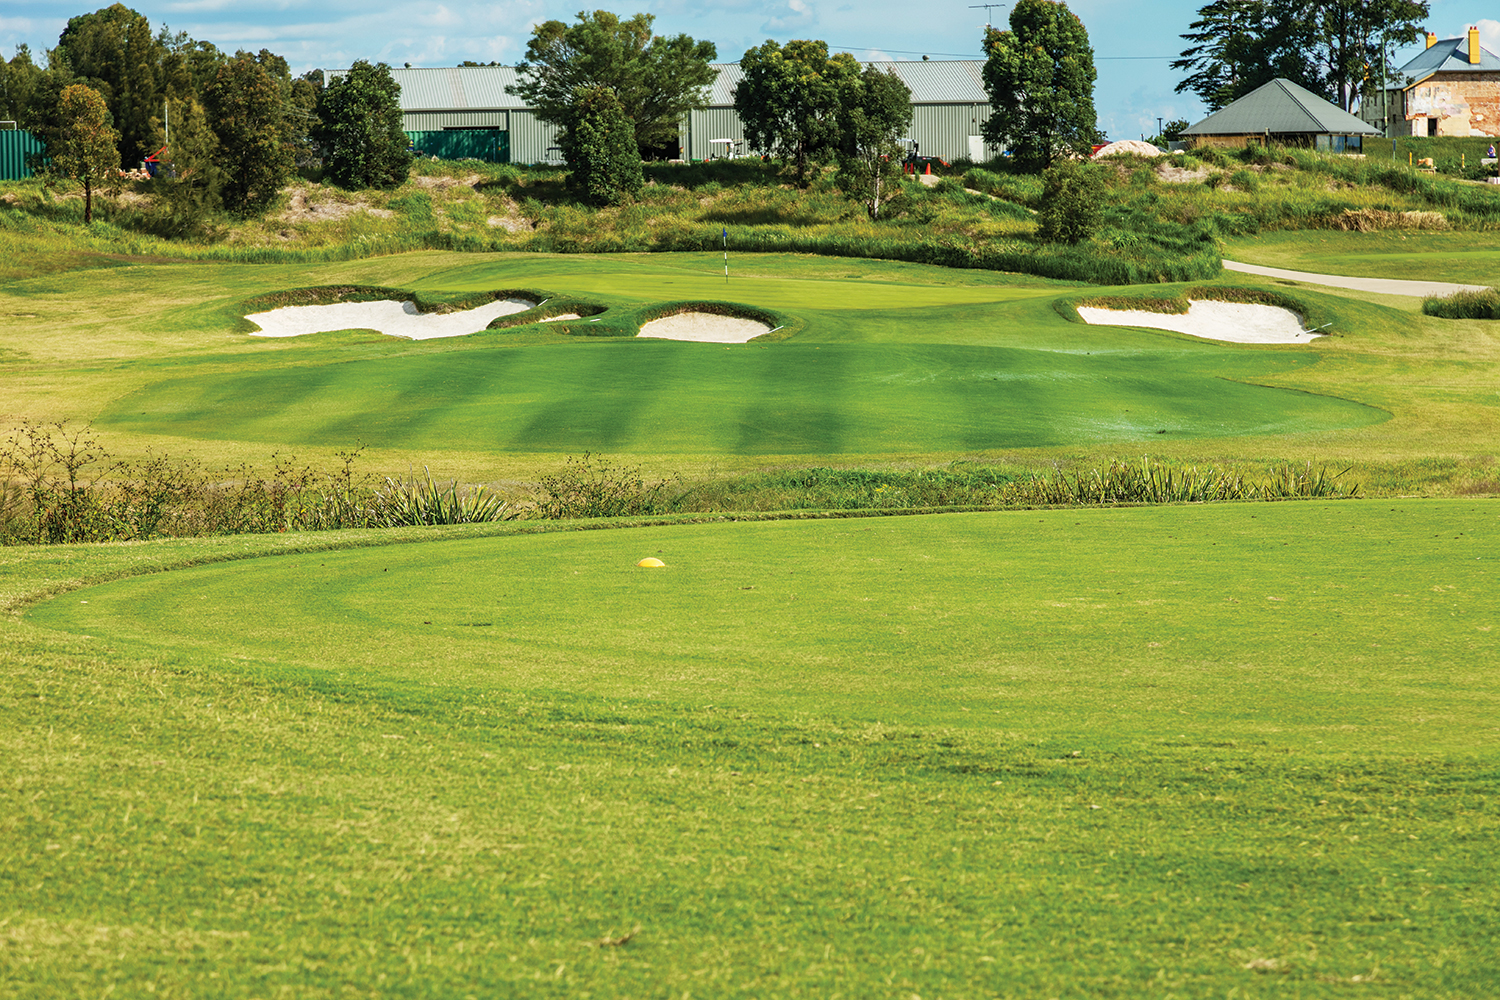 The 14th is a sleeper par 3, located near the high-quality practice facilities [above].